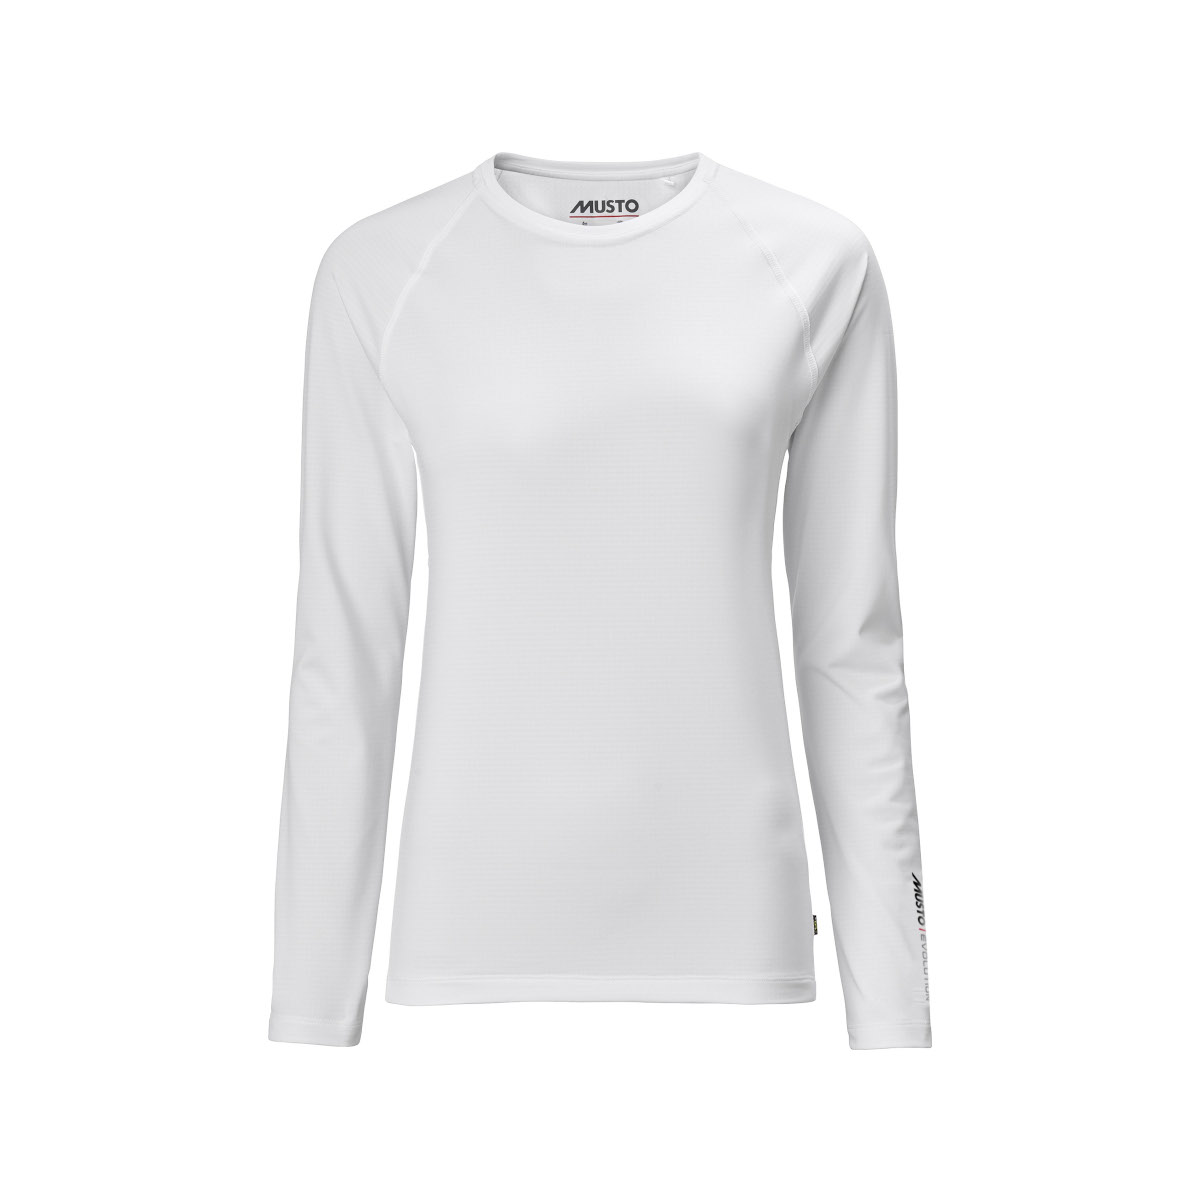 Musto Evolution Sunblock 2.0 T-shirt manches longues femme blanc, taille 8